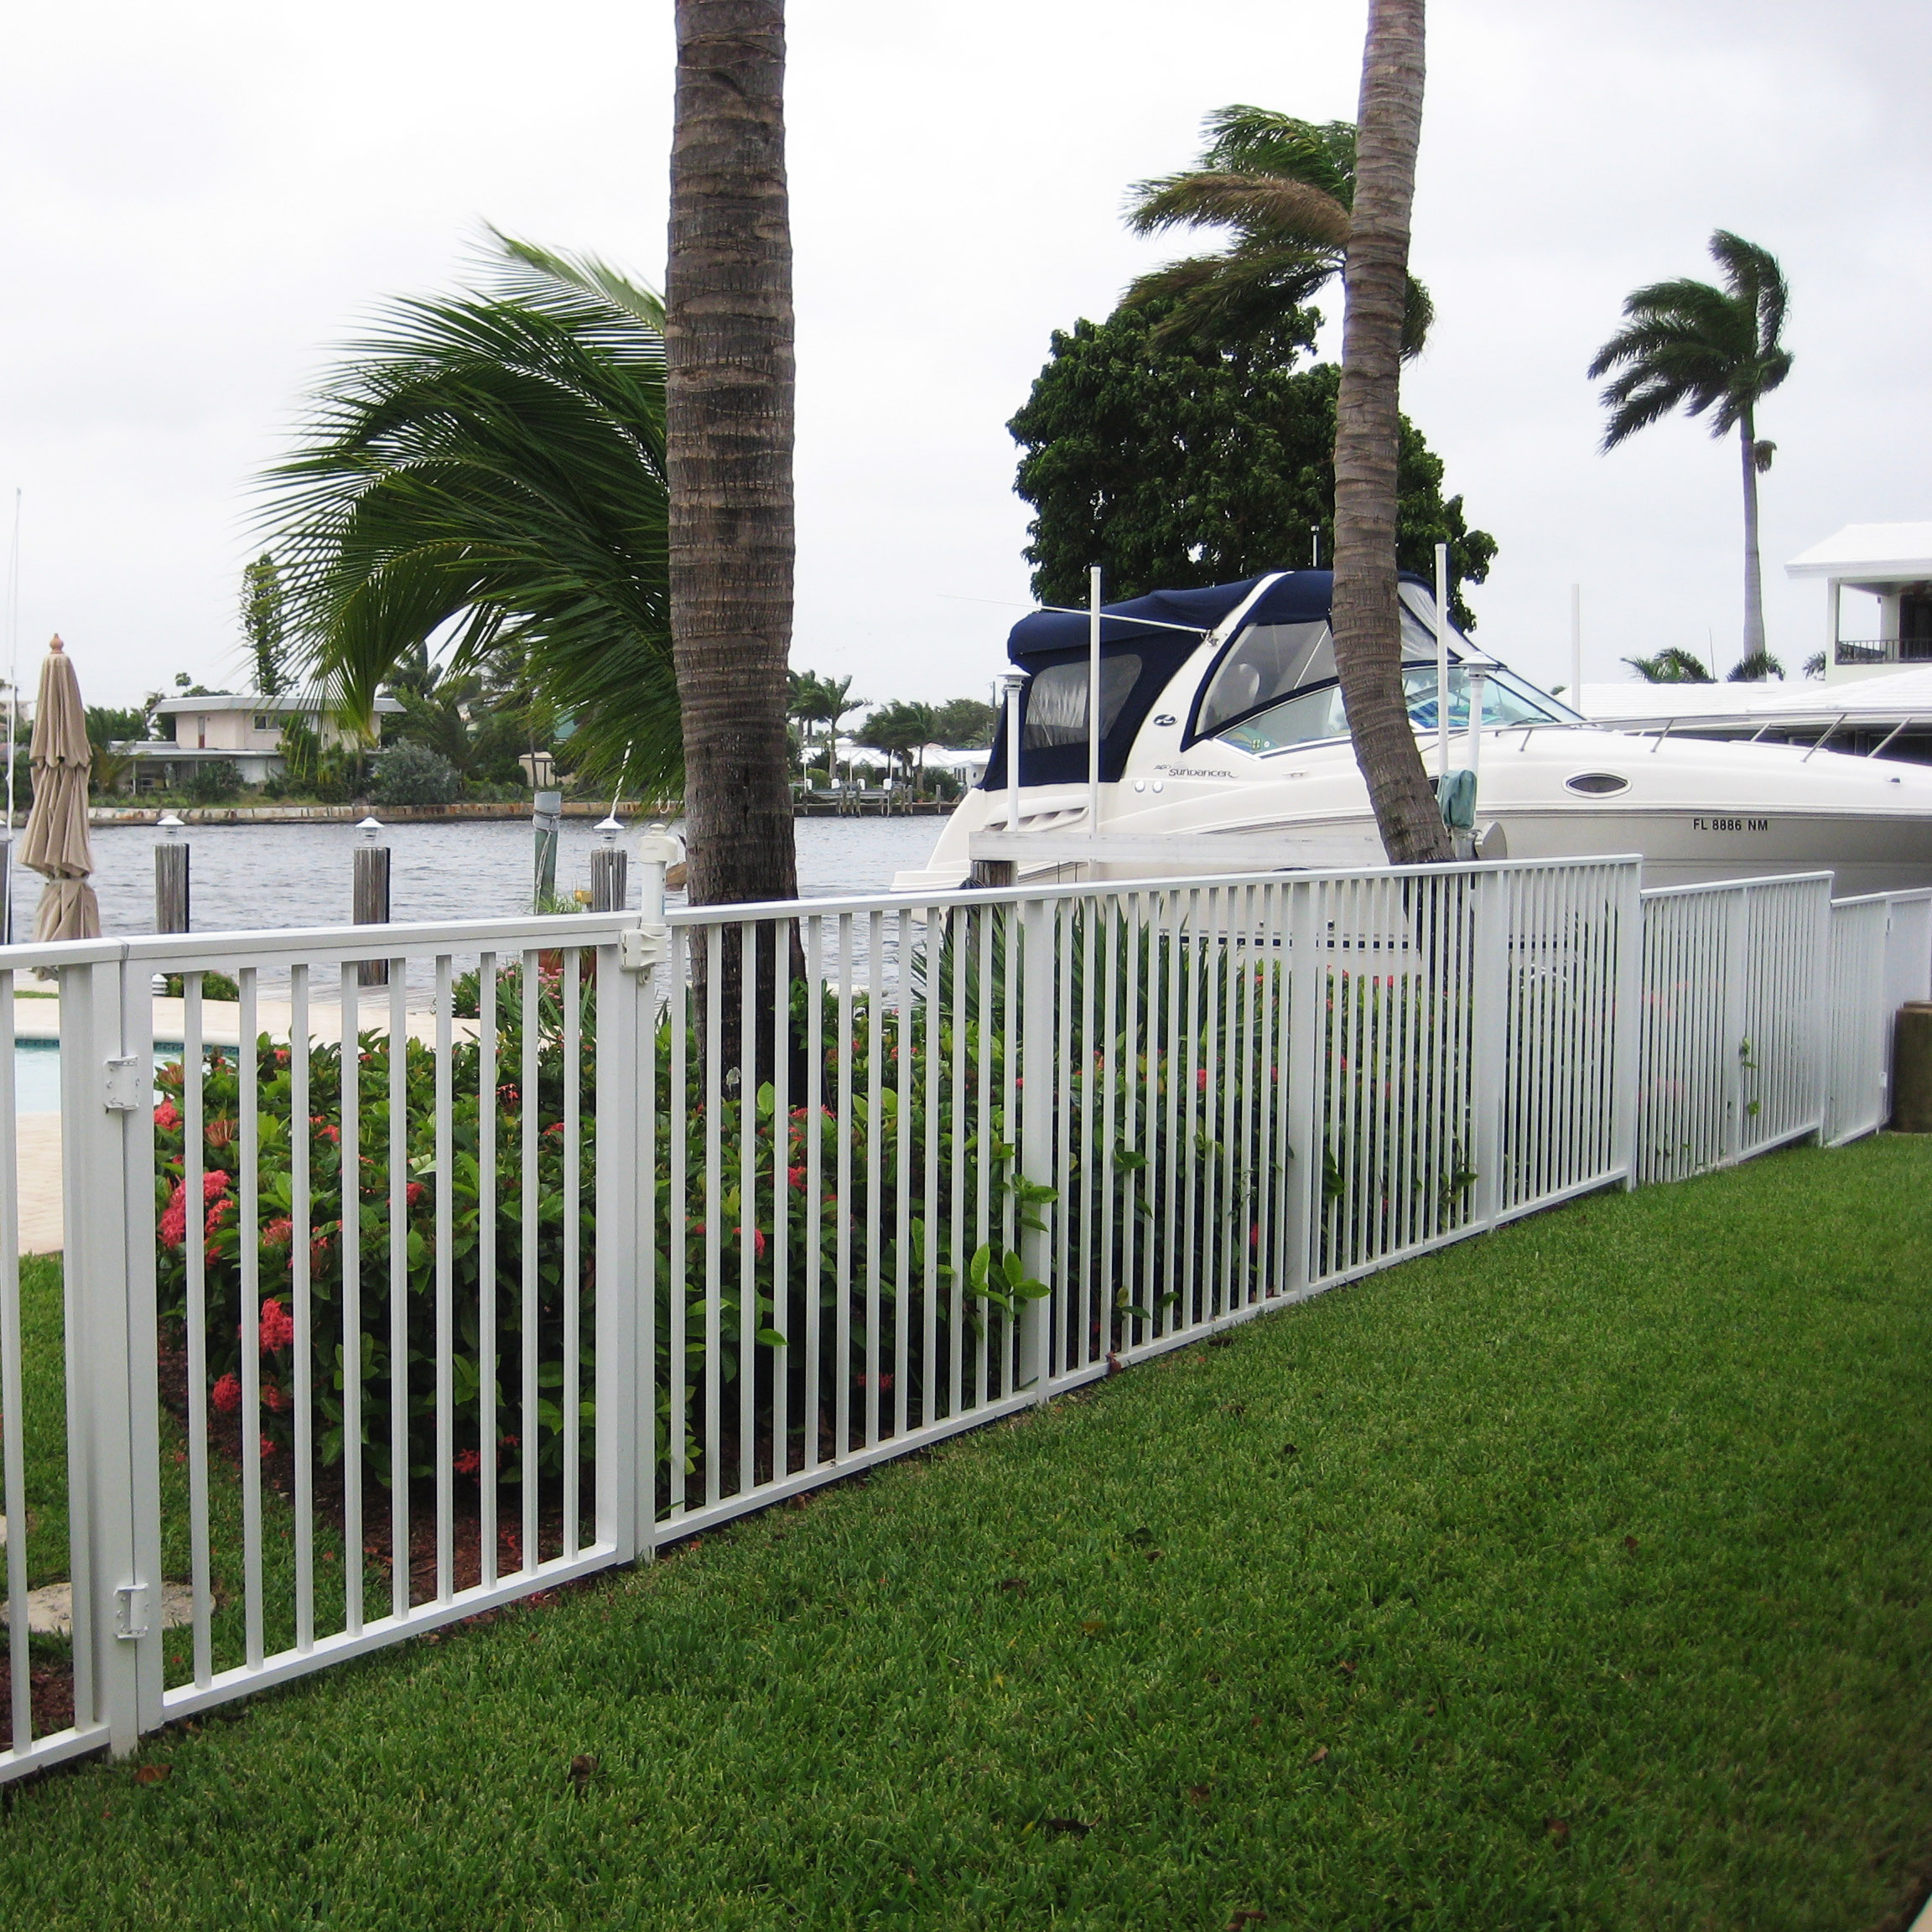 Aluminum Residential Picket Safety Fence Metal Fence for Garden or Yard or deck or pool with modern styles